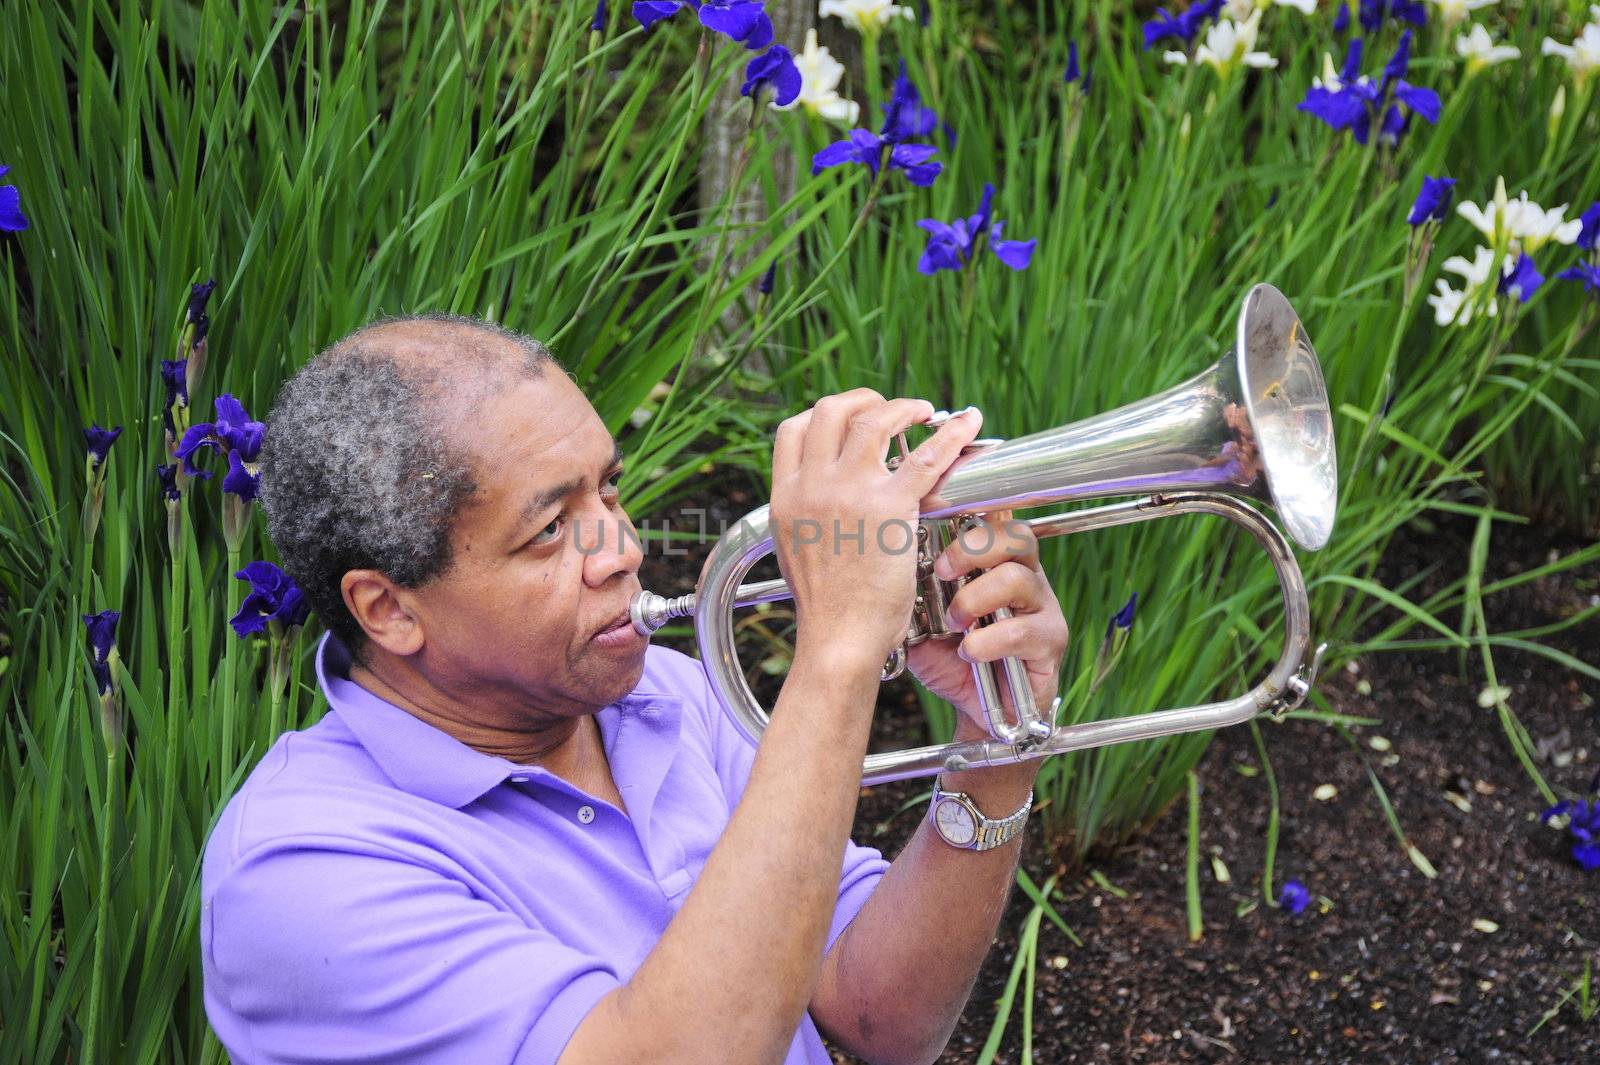 Jazz musician performing on his instrument in a flower garden.